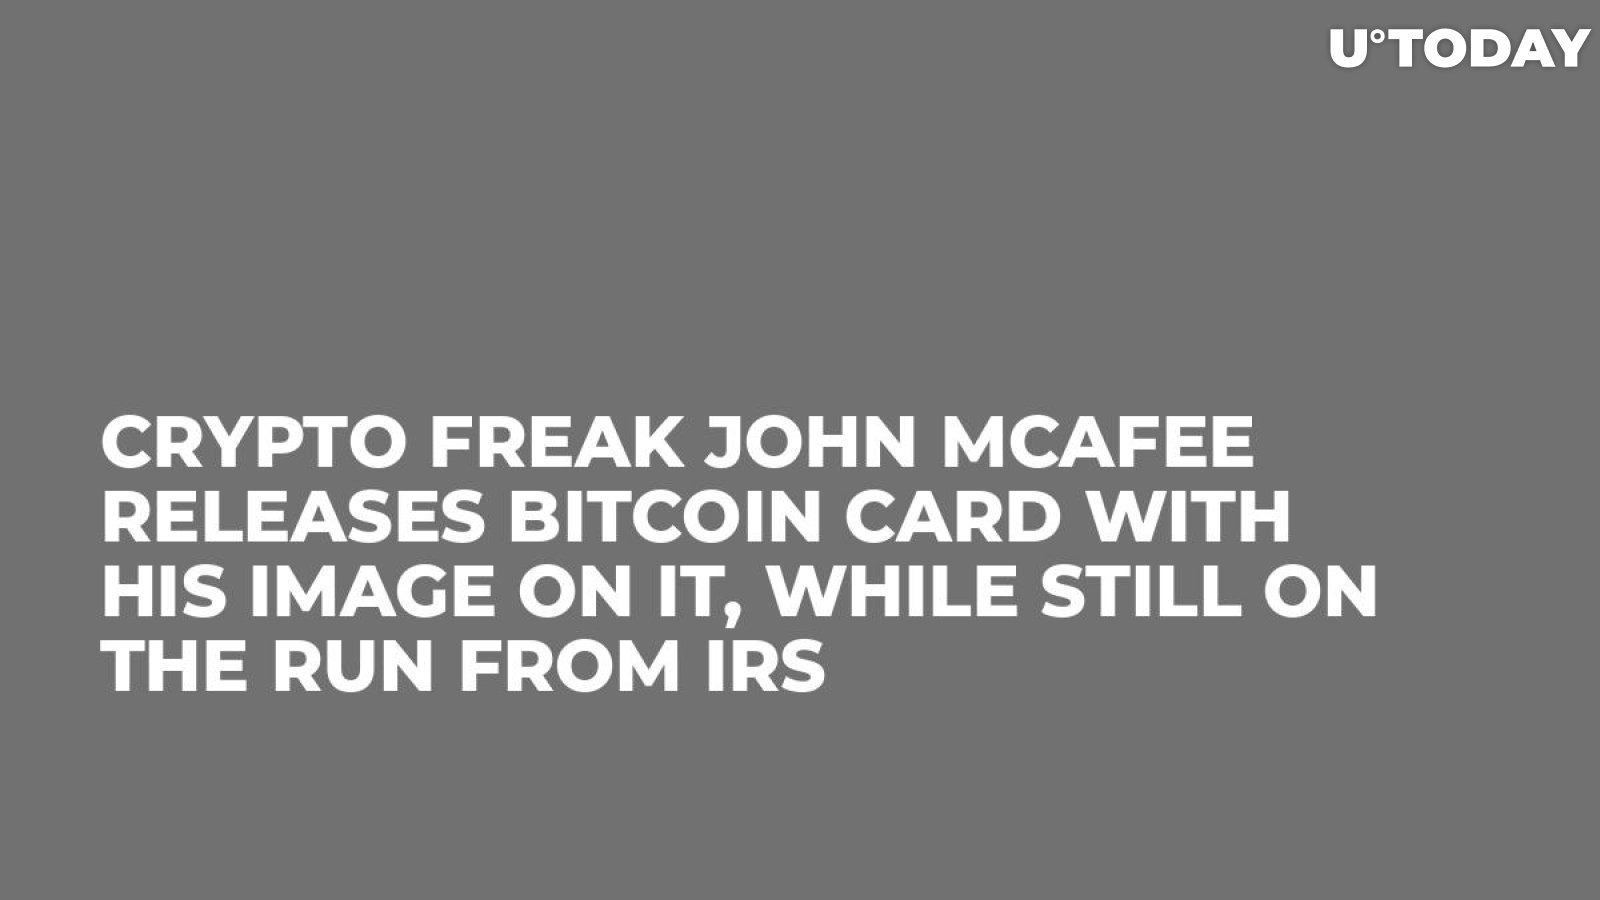 Crypto Freak John McAfee Releases Bitcoin Card with His Image on It, While Still on the Run from IRS